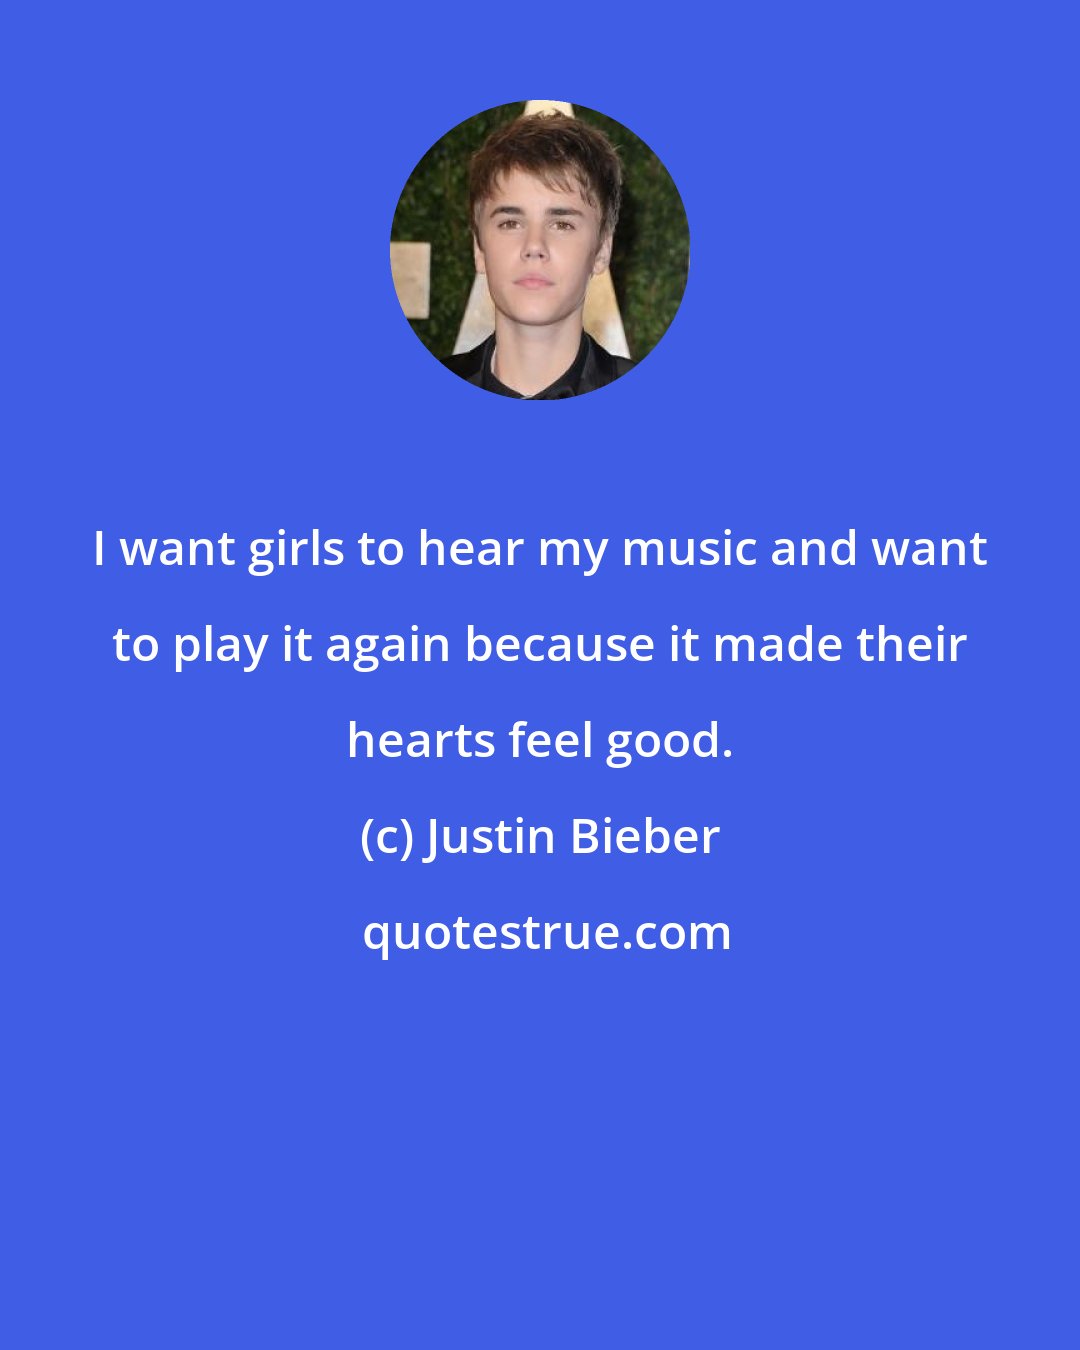 Justin Bieber: I want girls to hear my music and want to play it again because it made their hearts feel good.